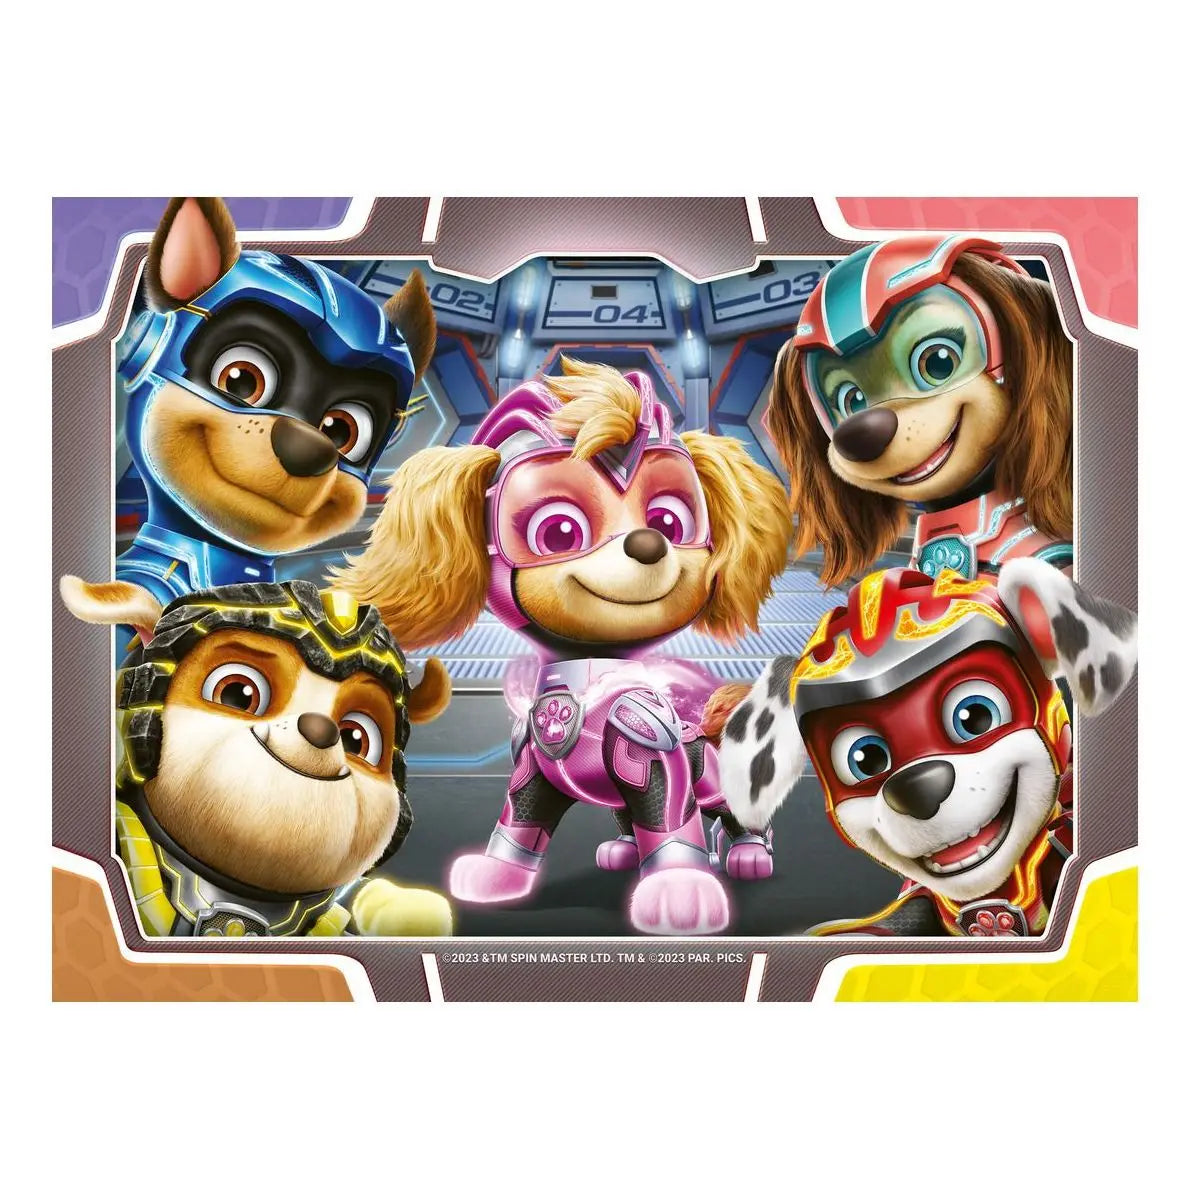 Paw Patrol Mighty Movie 4 in a Box Jigsaw Puzzle Ravensburger